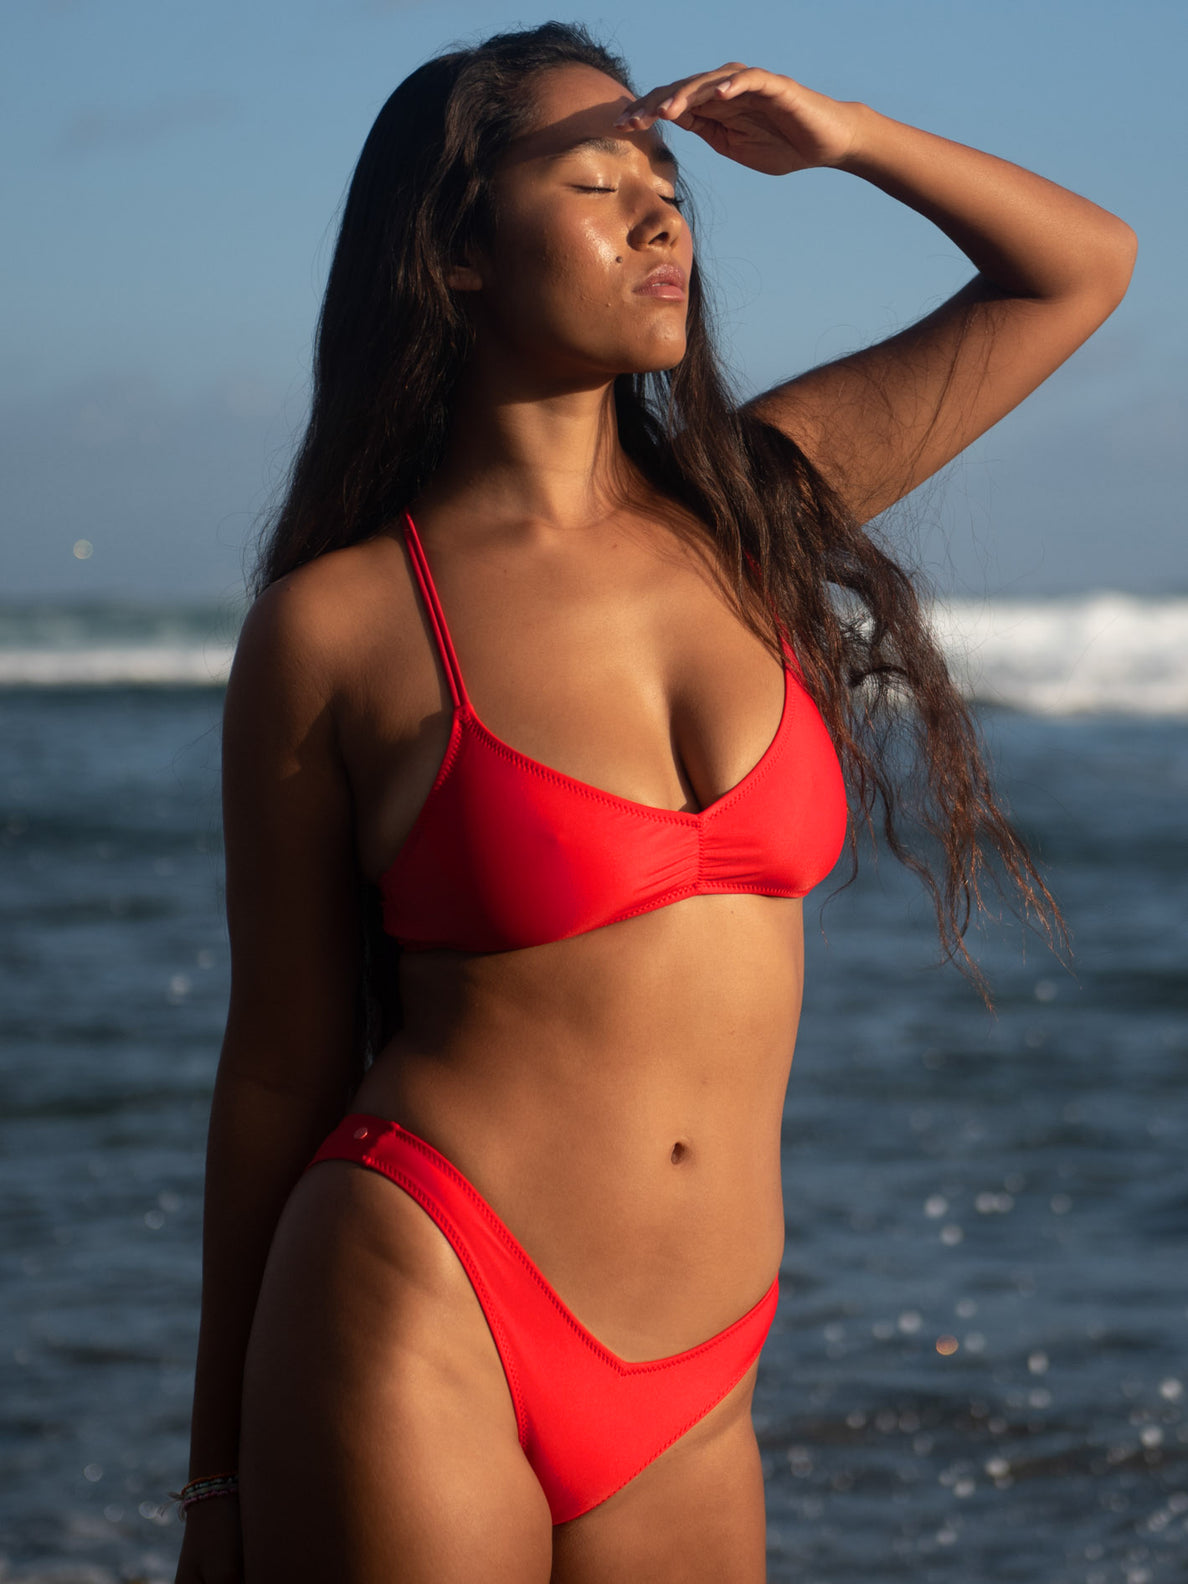 Simply Solid V-Neck Bikini Top - Candy Apple